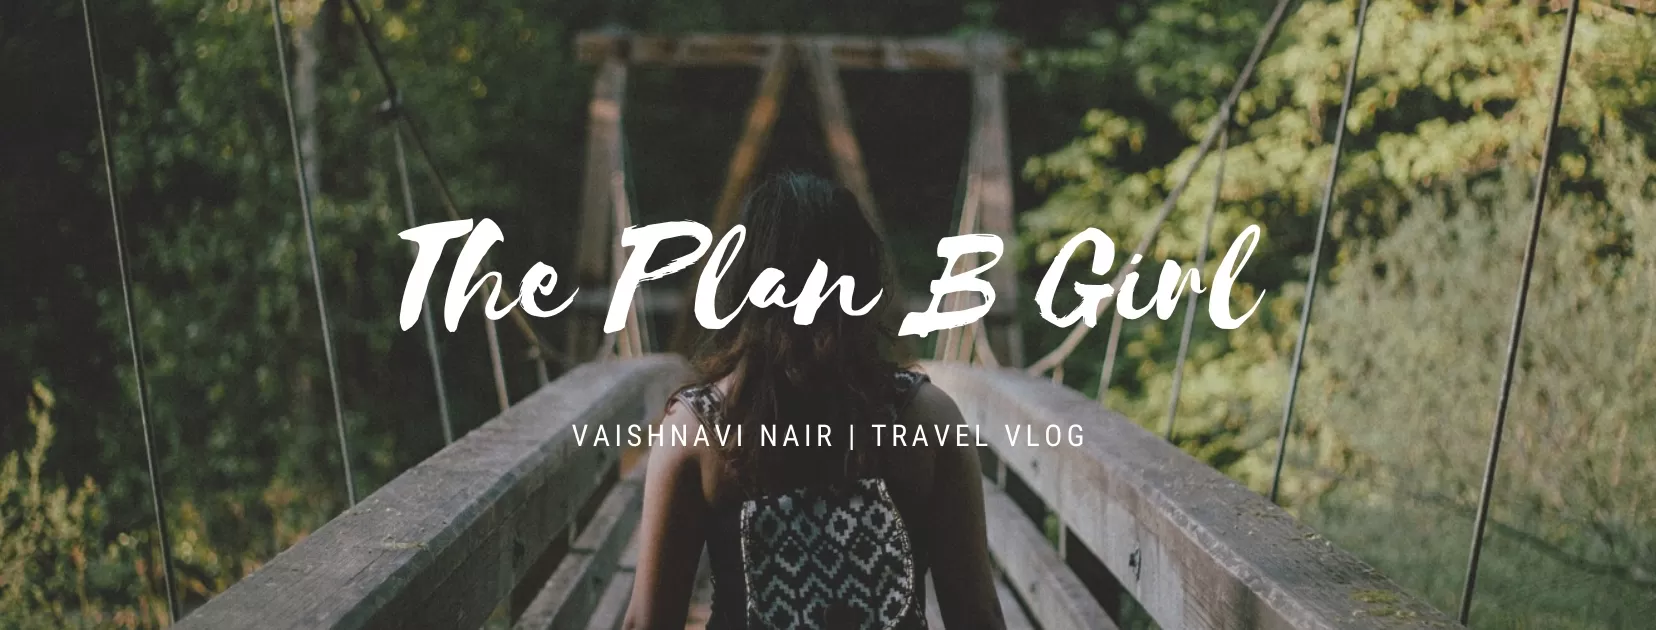 Cover Image of The Plan B Girl